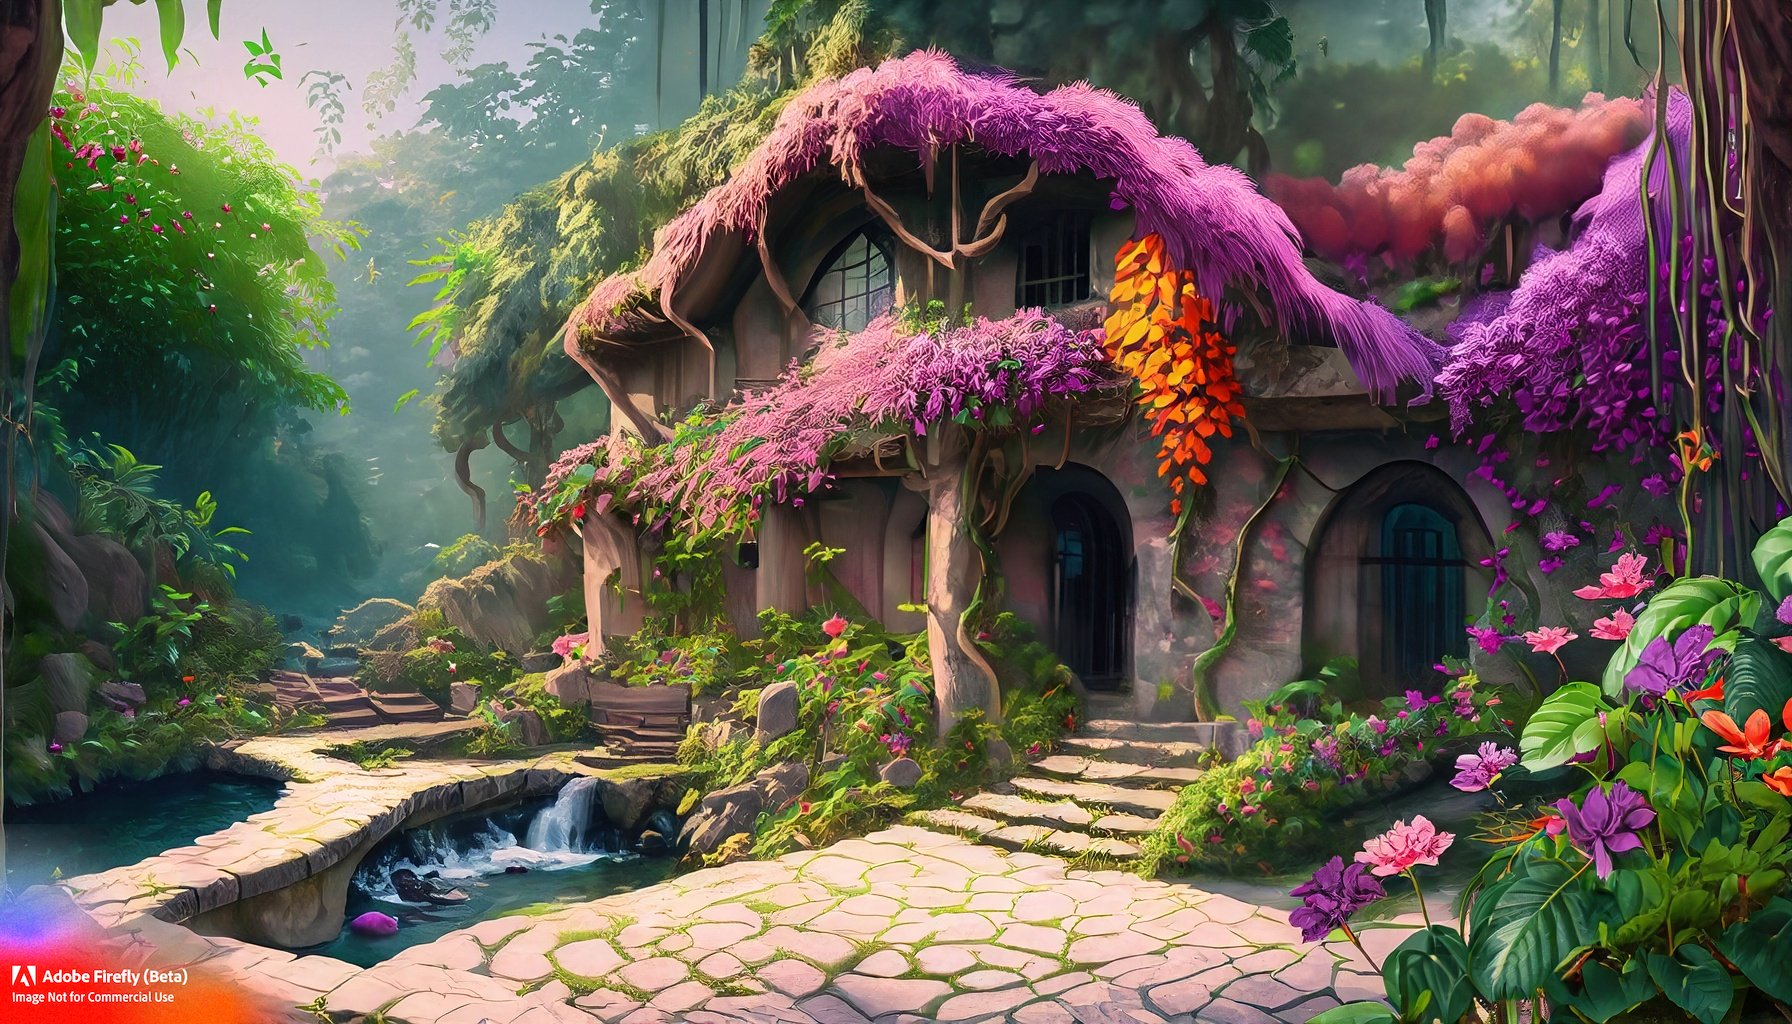 Firefly_A+house in a tropical jungle, climbing vines, flowers of pink, purple, orange. There's a gray stone pathway leading to a stream._art,wide_angle,fantasy_52274.jpg